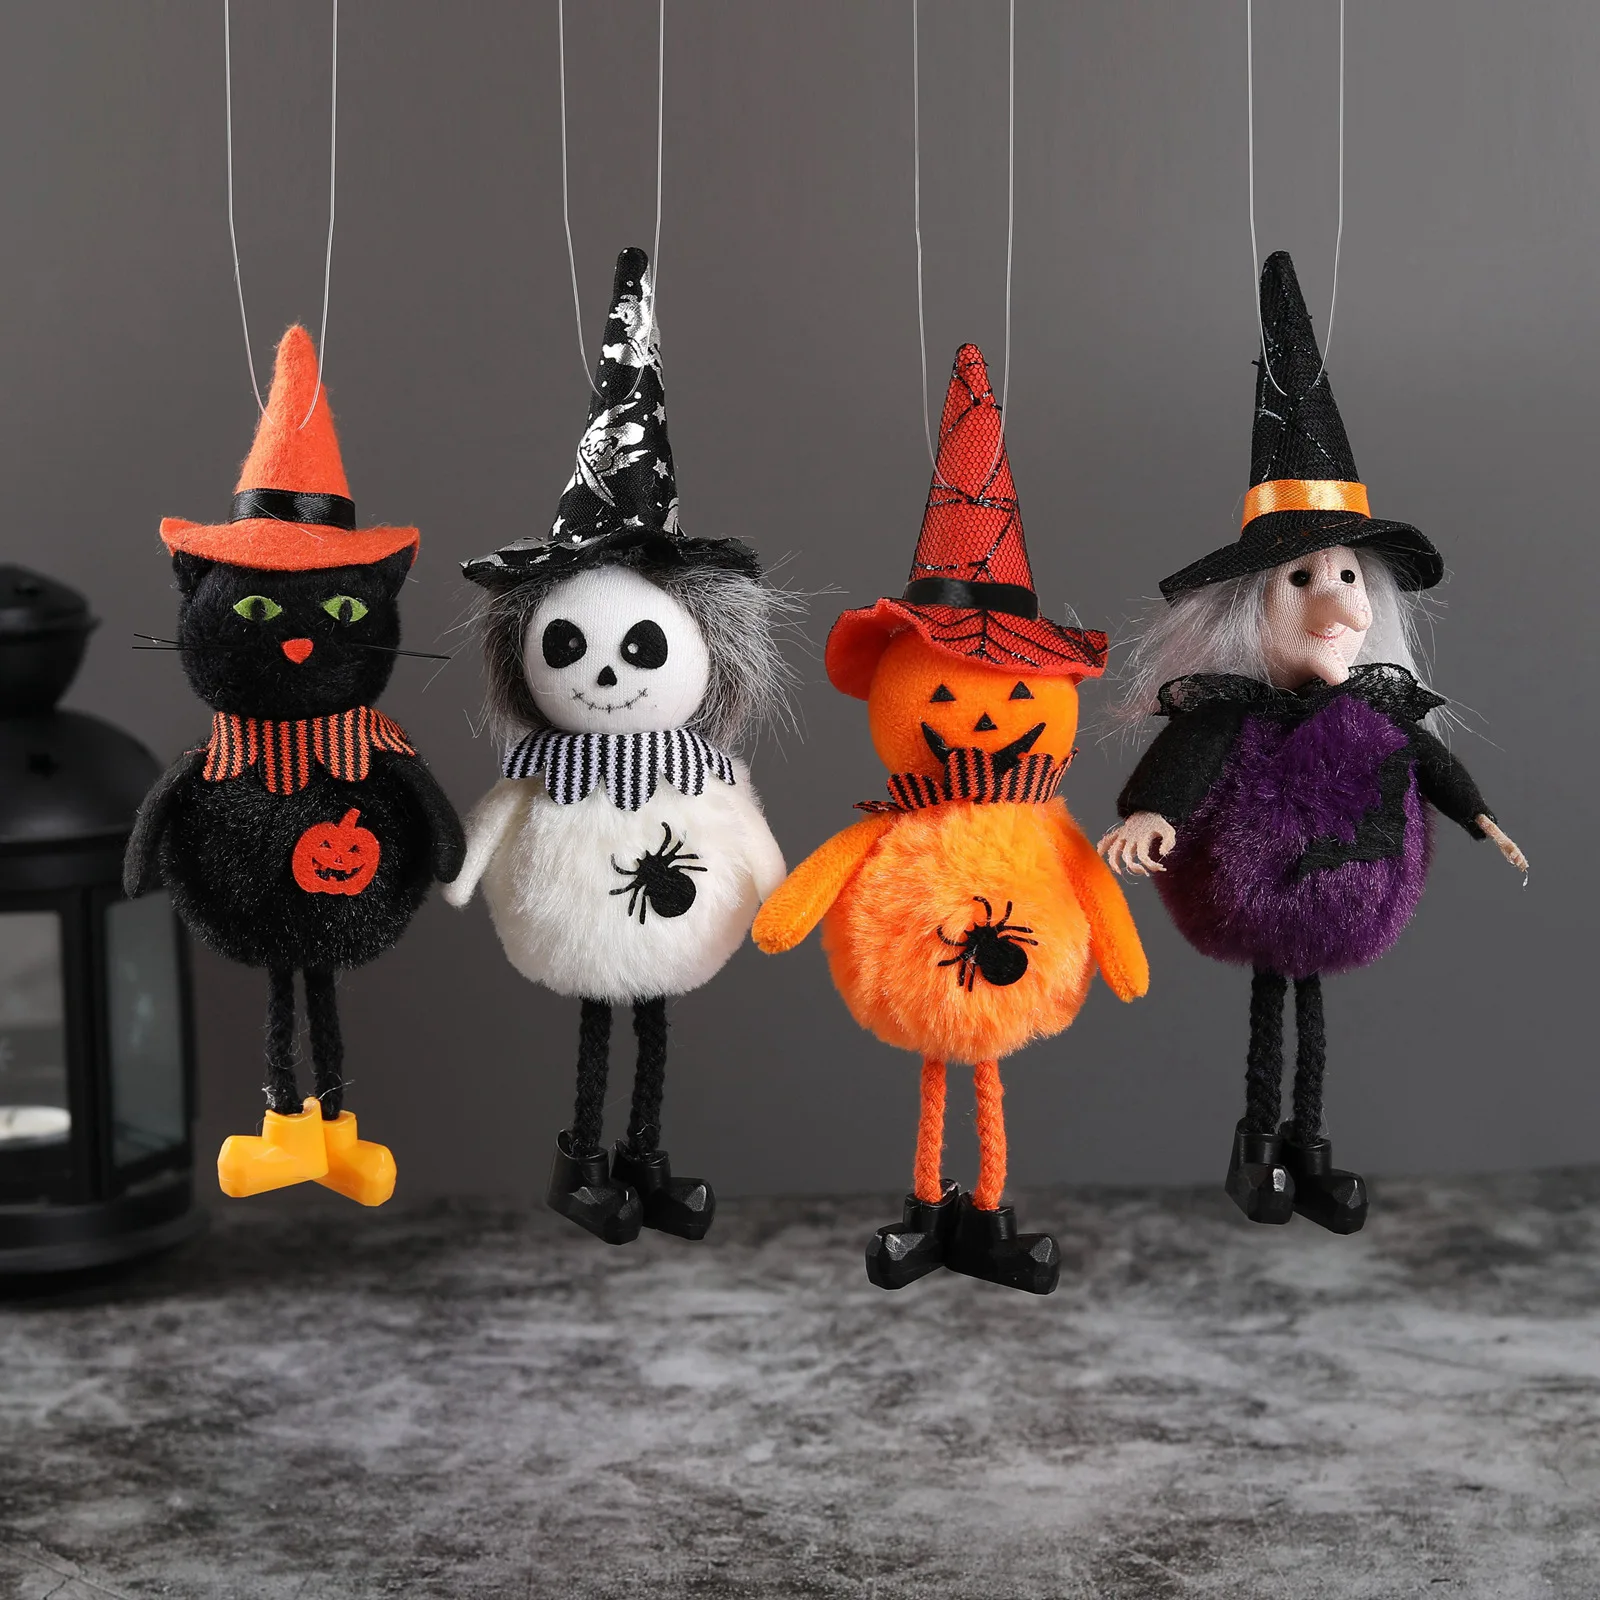 

Halloween Pendant Ghost Festival Bar Pumpkin Witch Ornaments Broom Haunted House Decoration Props KTV Decorations